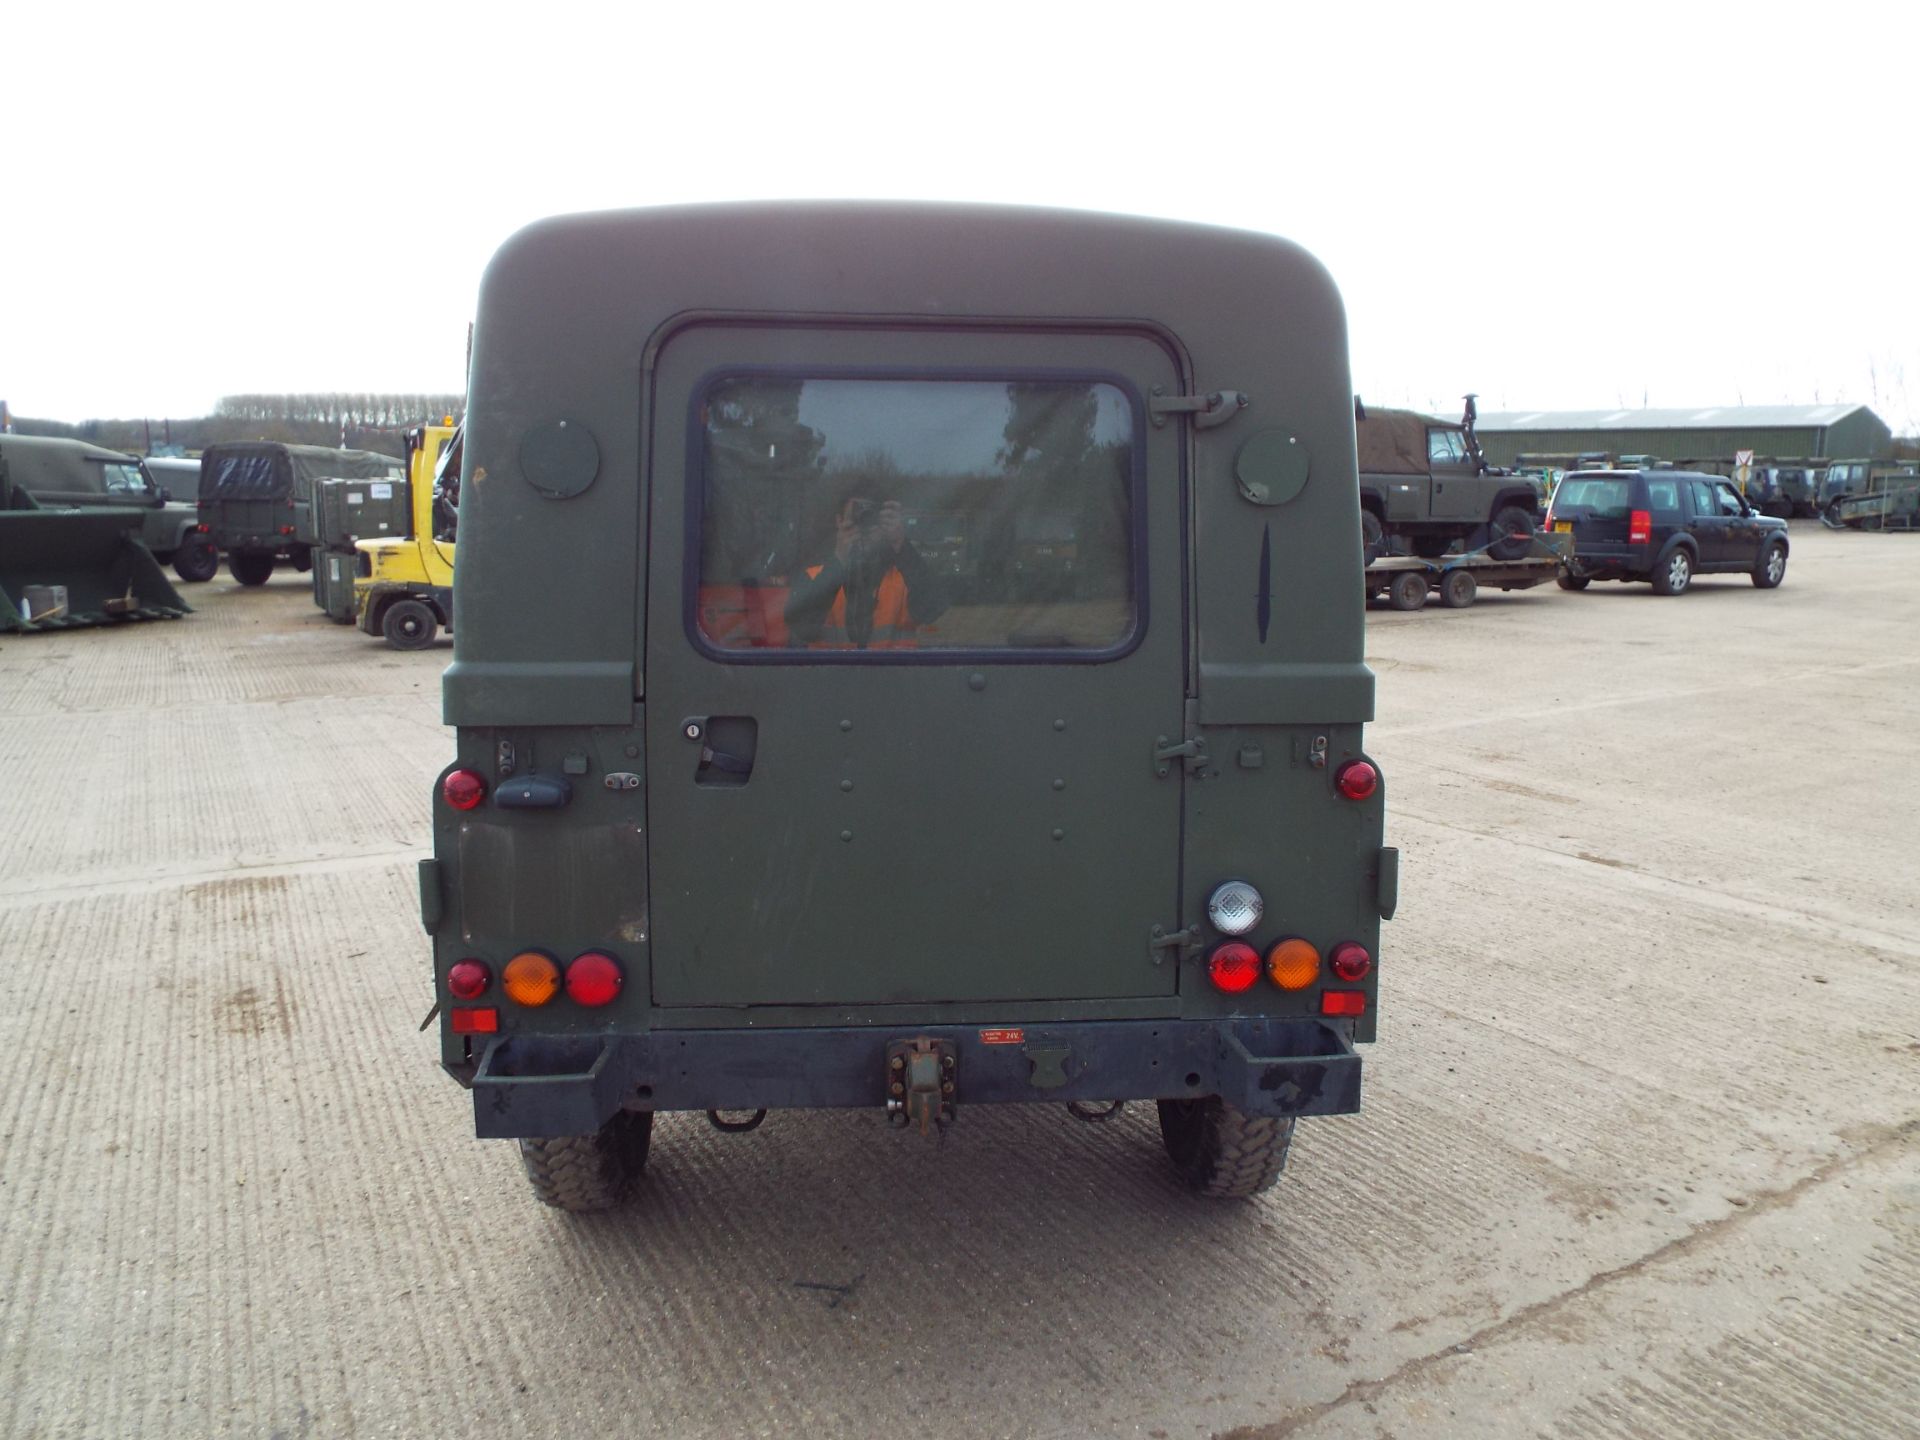 Military Specification Land Rover Wolf 110 Hard Top - Image 6 of 25